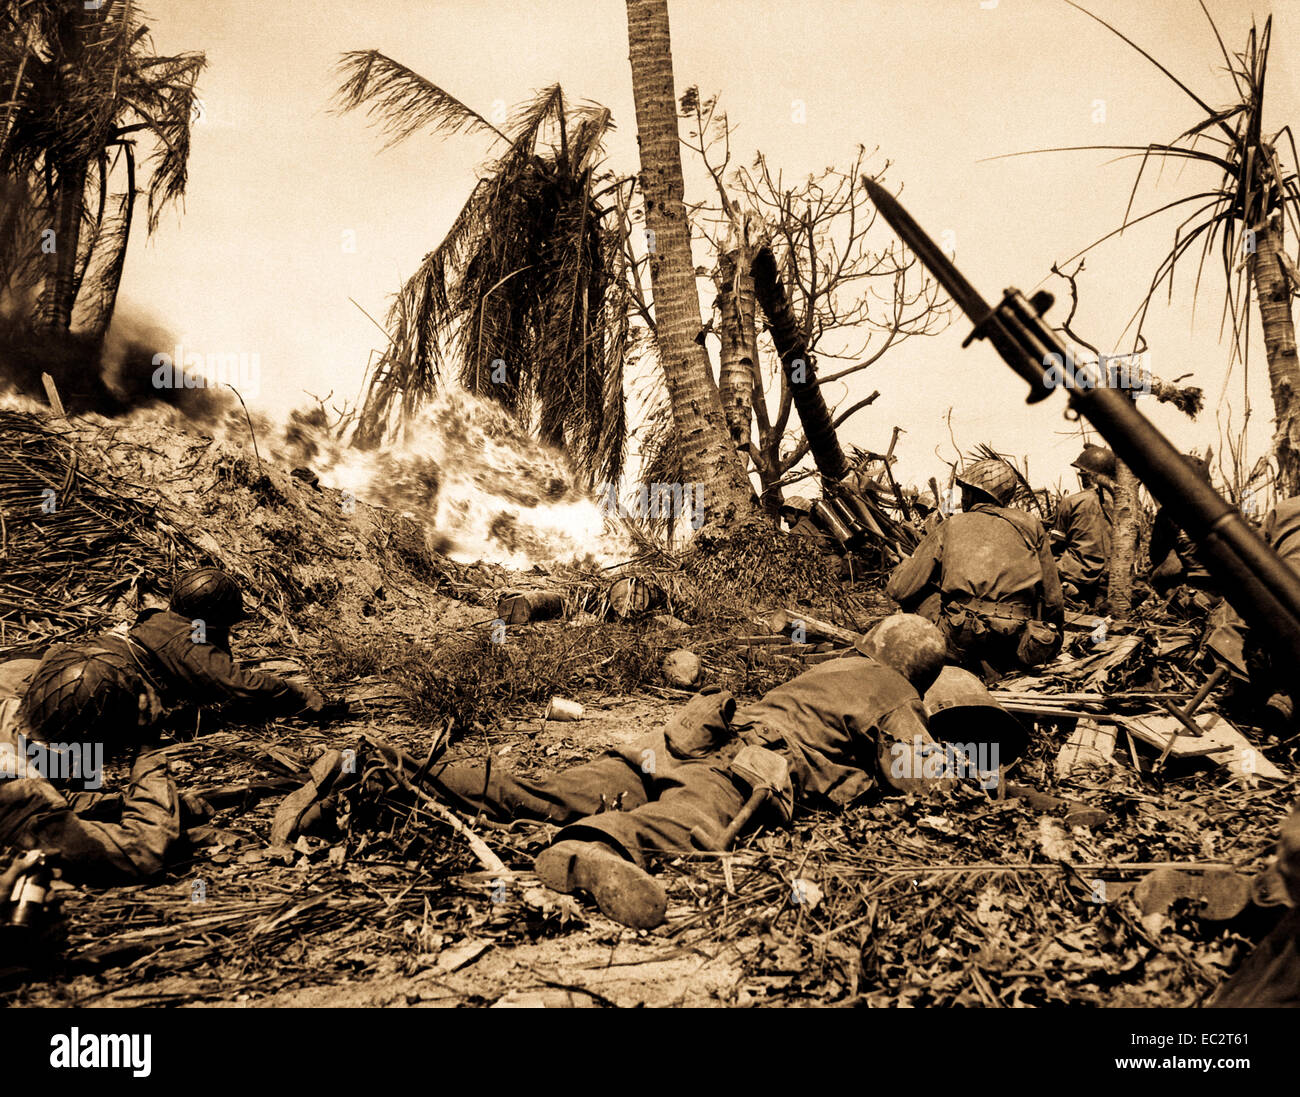 Men of the 7th Div. using flame throwers to smoke out Japanese from a block house on Kwajalein Island, while others wait with rifles ready in case Japs come out. February 4, 1944.  Cordray. (Army) Stock Photo